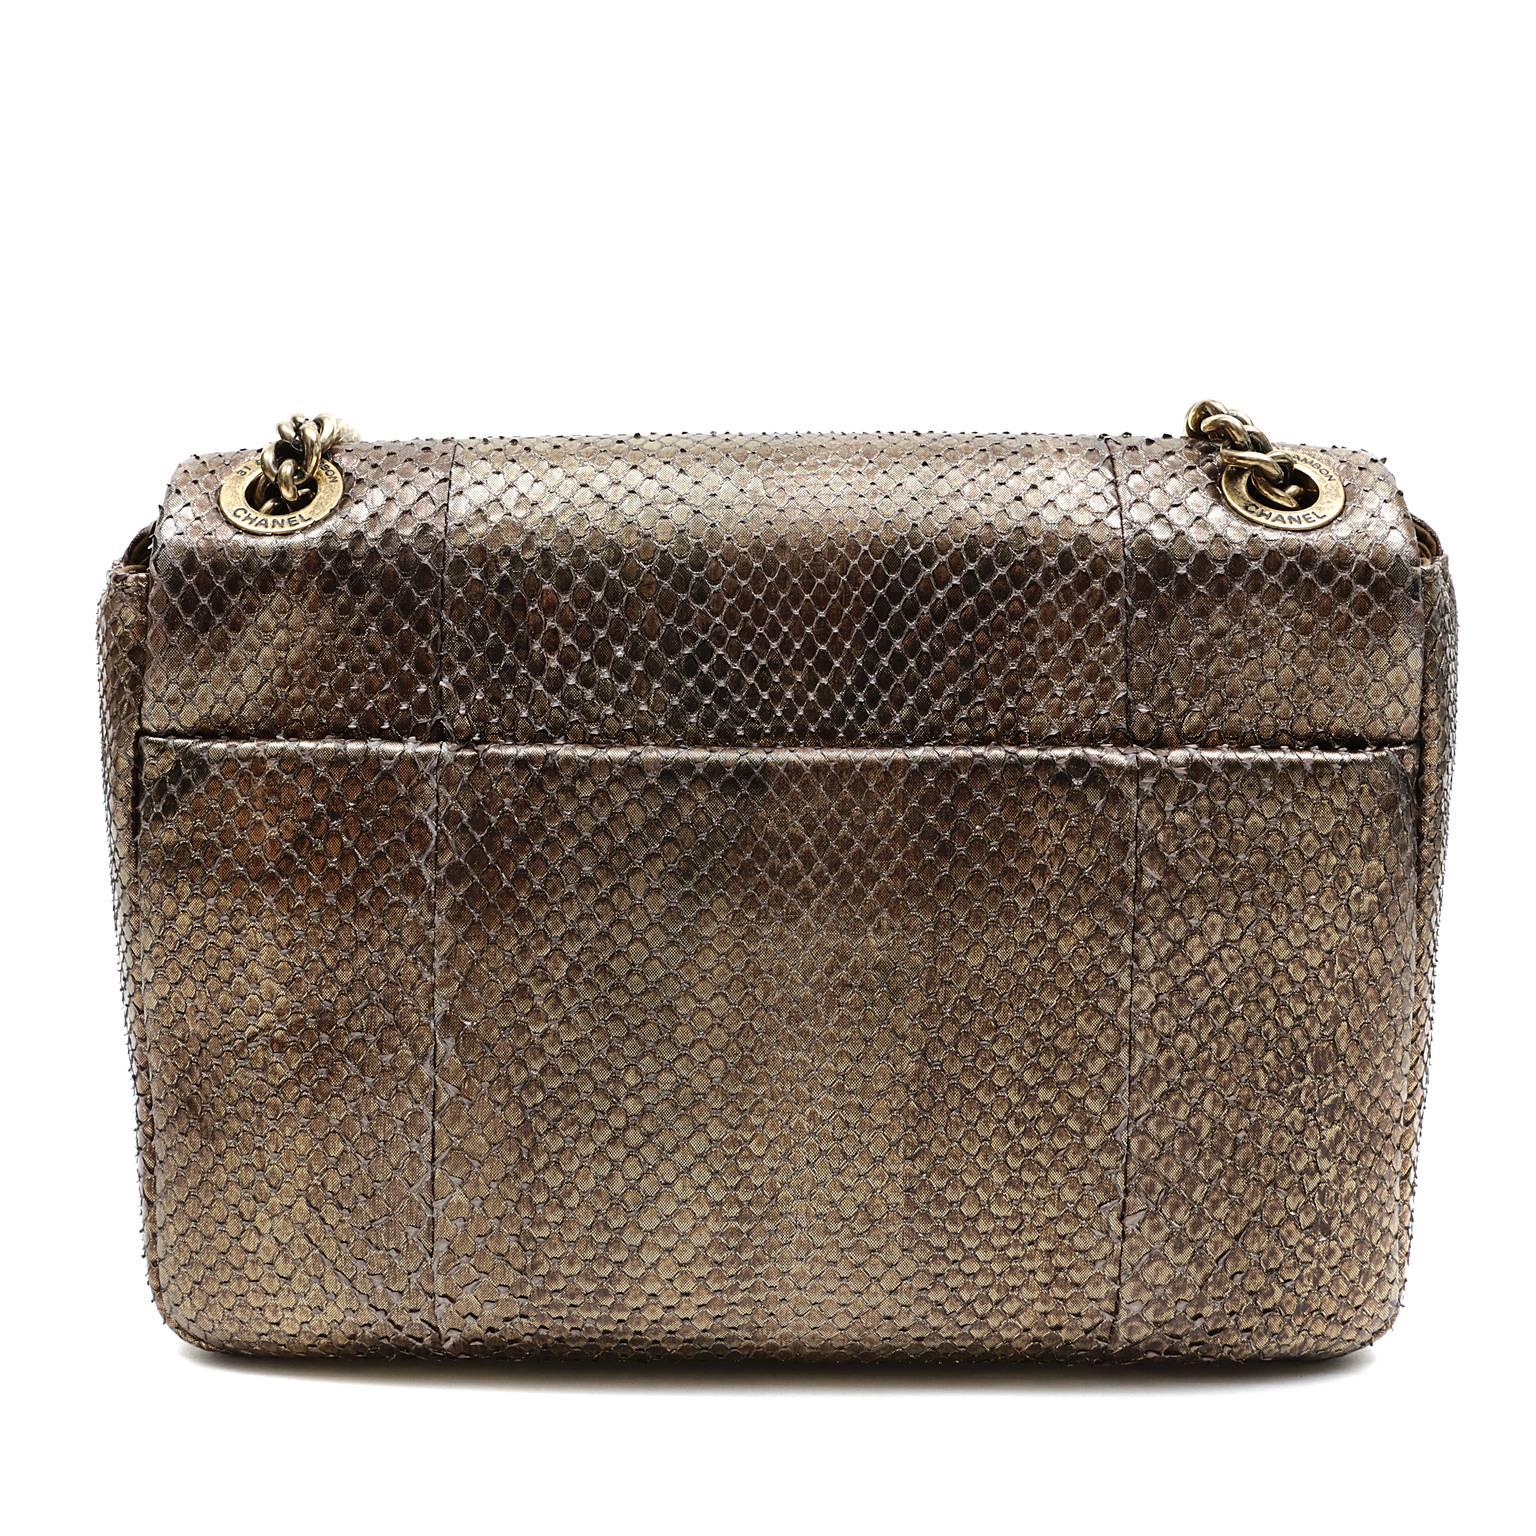 Chanel Dark Gold Python Shanghai Flap Bag- PRISTINE 
 Neutral yet dramatic in a subtle metallic exotic- a must have for collectors.  

Golden bronze python skin medium flap bag is accented with antiqued gold hardware.  Unique hinged CC plaque